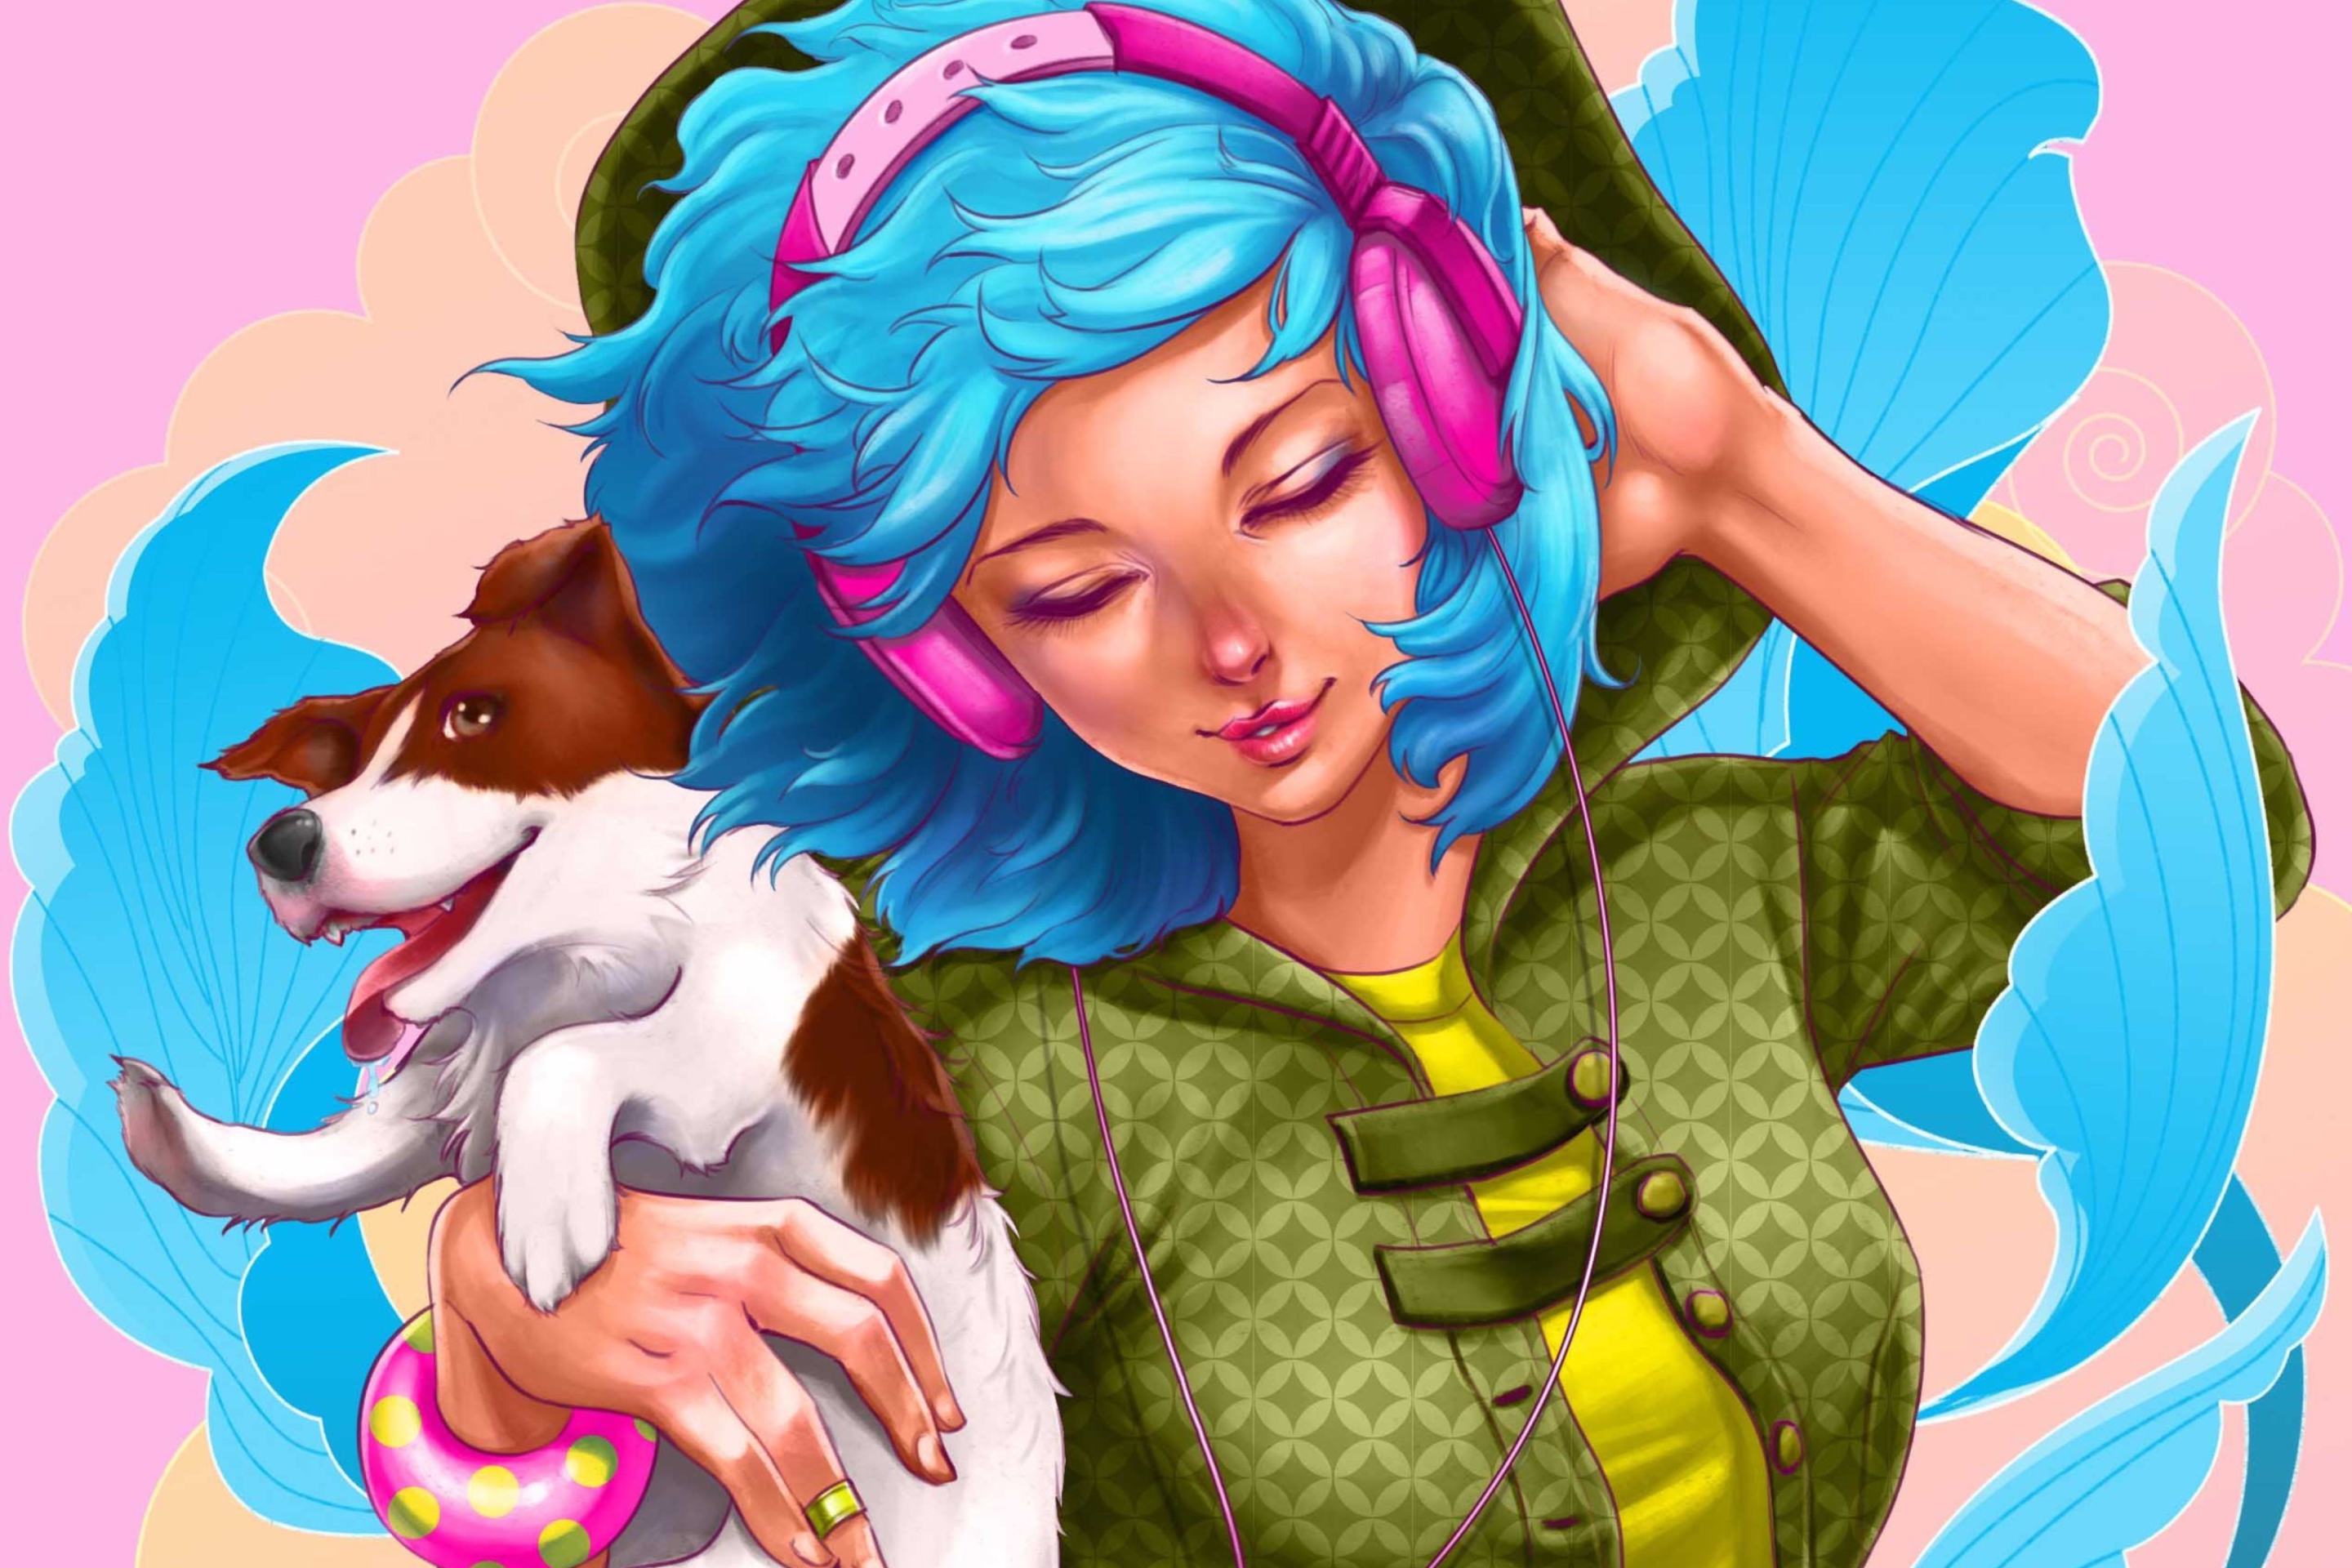 Girl With Blue Hair And Pink Headphones Drawing wallpaper 2880x1920